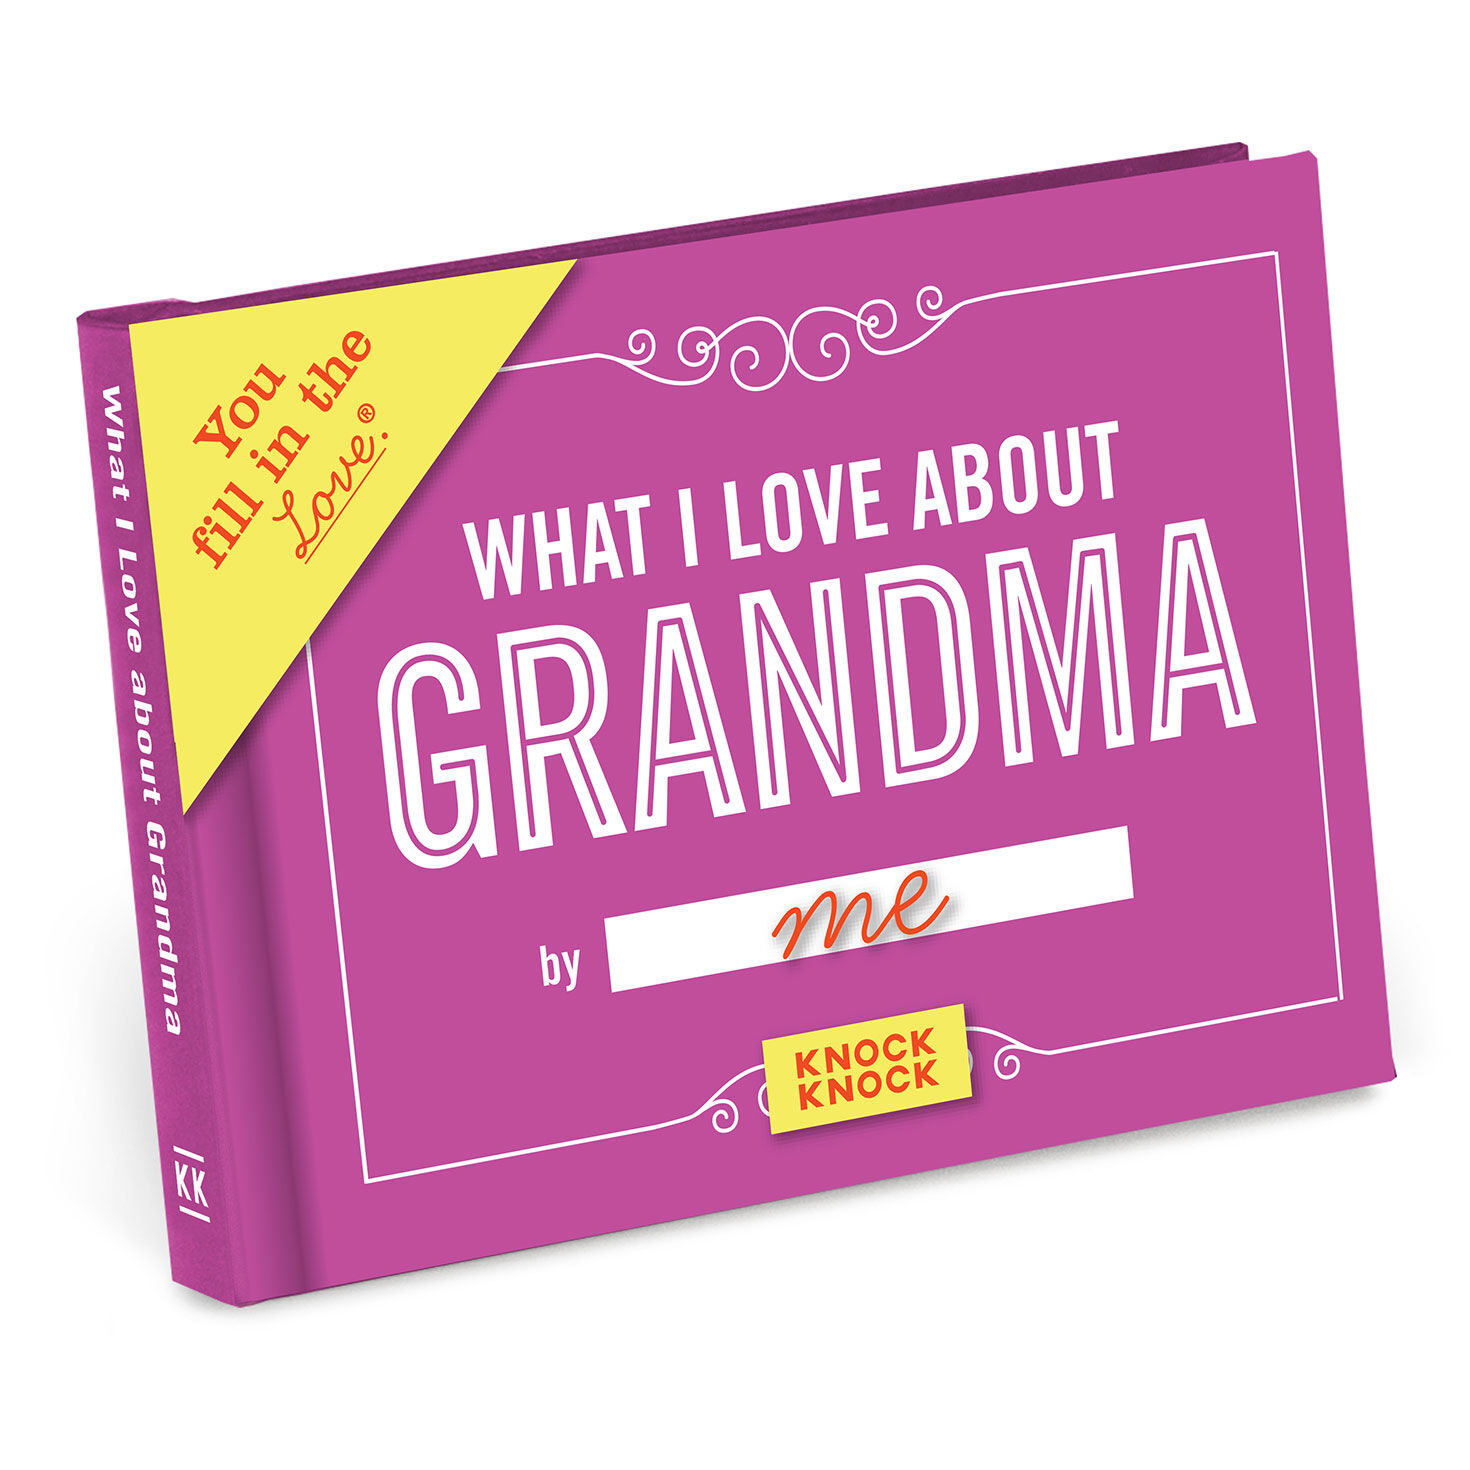 https://www.hallmark.com/dw/image/v2/AALB_PRD/on/demandware.static/-/Sites-hallmark-master/default/dw8684e3e0/images/finished-goods/products/50073/What-I-Love-About-Grandma-Personalized-Gift-Book_50073_01.jpg?sfrm=jpg